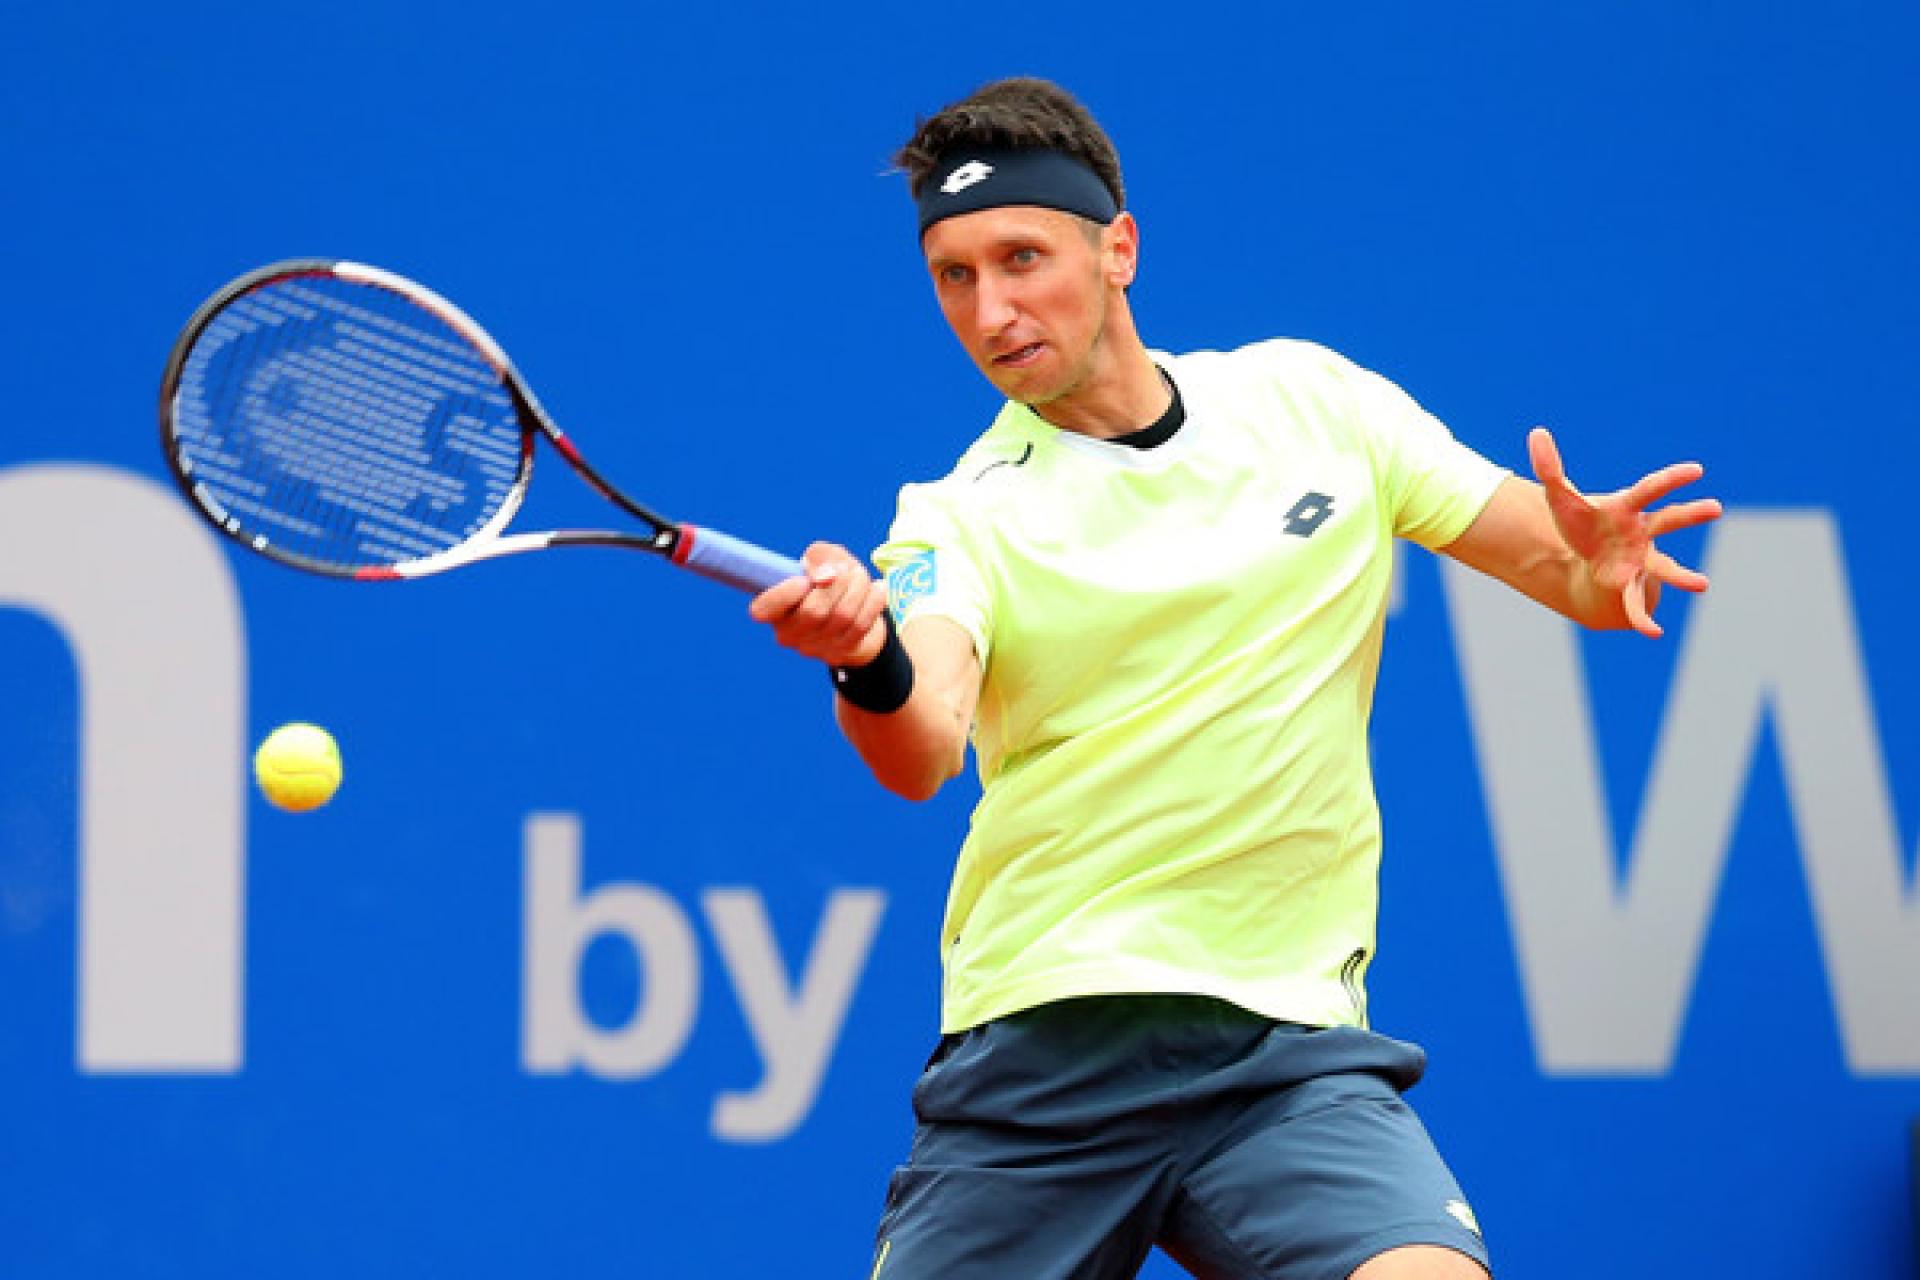 Tennis Player Stakhovsky Reached the Final of the Doubles Competition in Kazakhstan